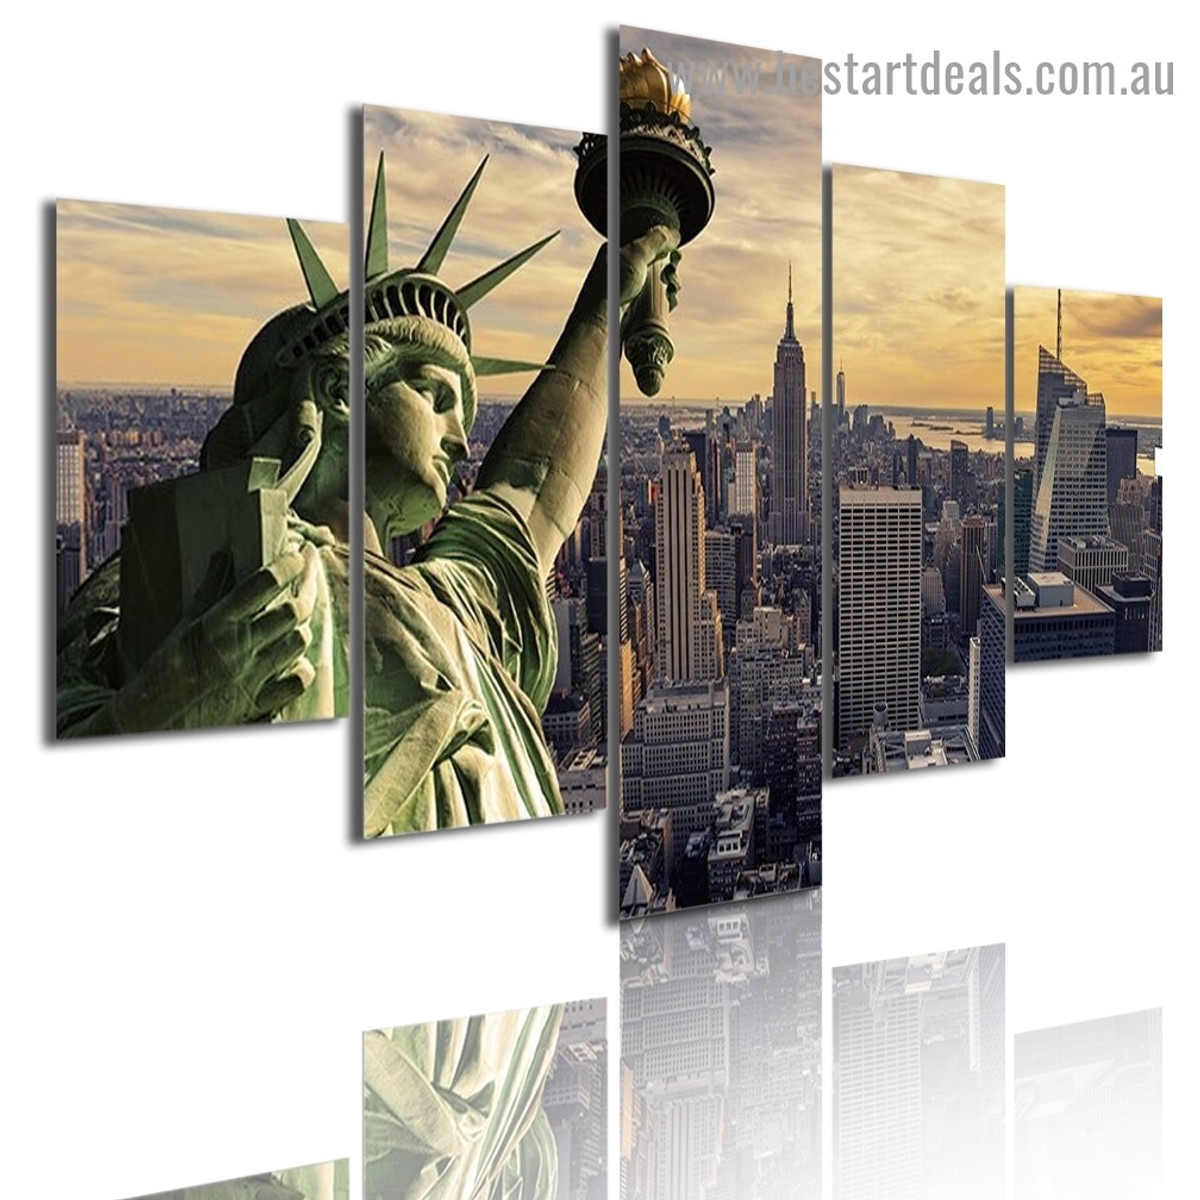 Statue of Liberty Cityscape Modern Artwork Picture Canvas Print for Room Wall Adornment